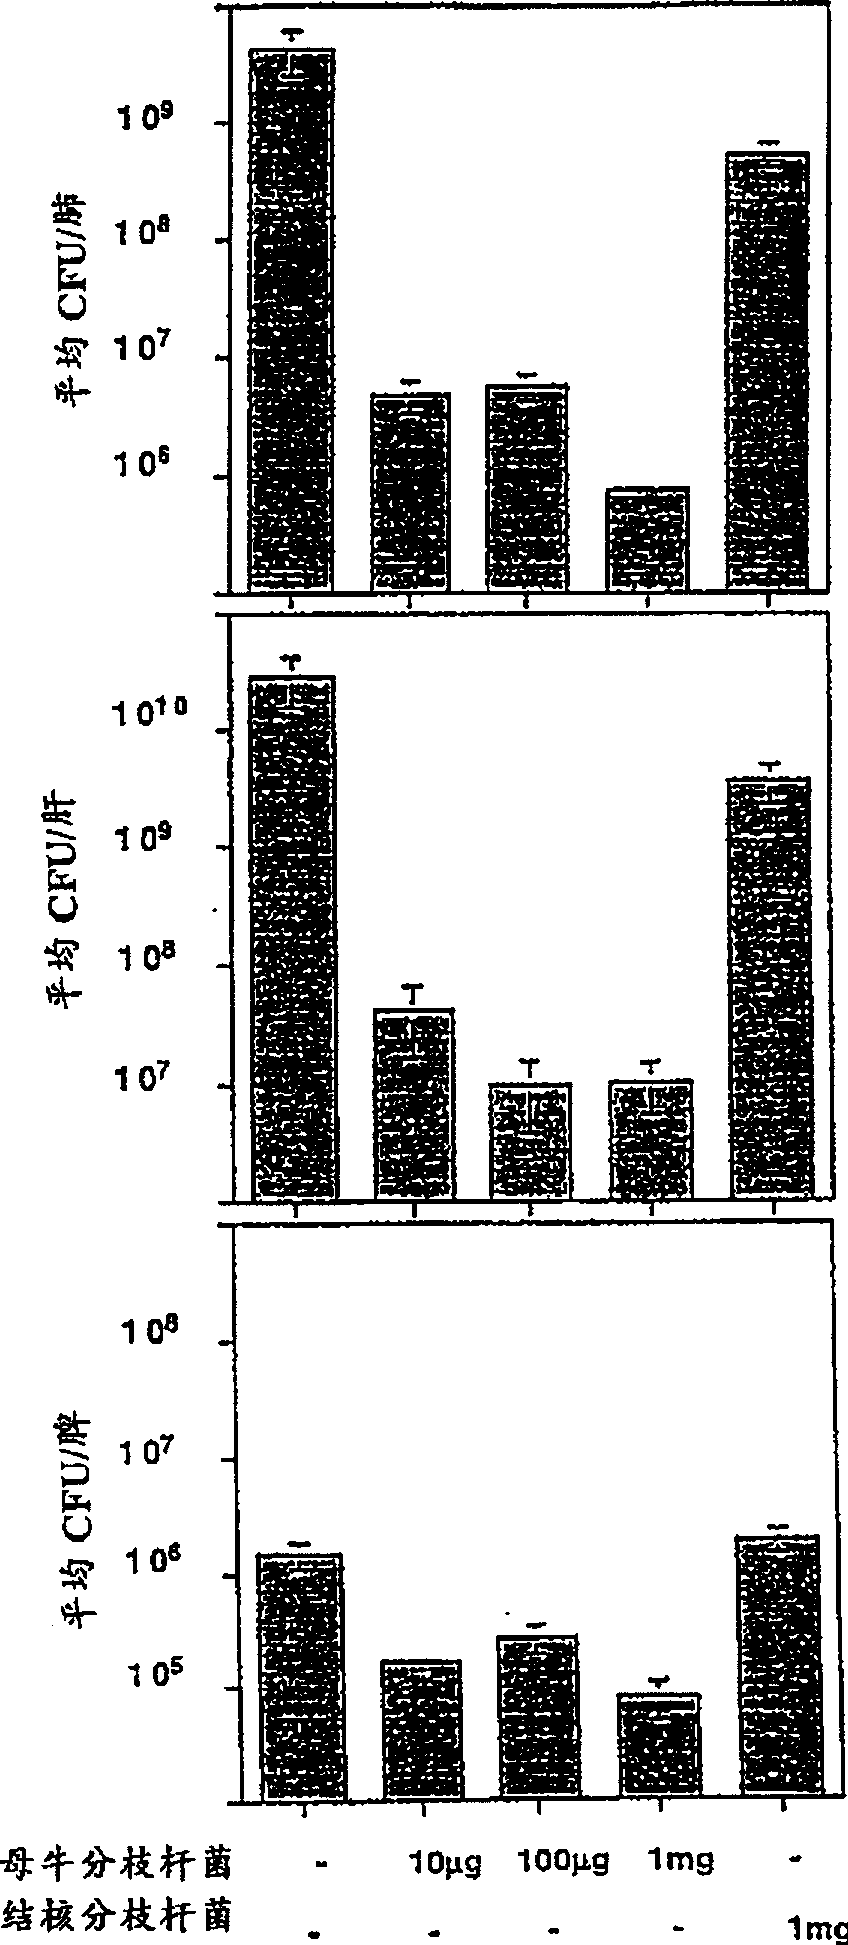 Compsns. derived from i(mycobacterium vaccae) and methods for their use